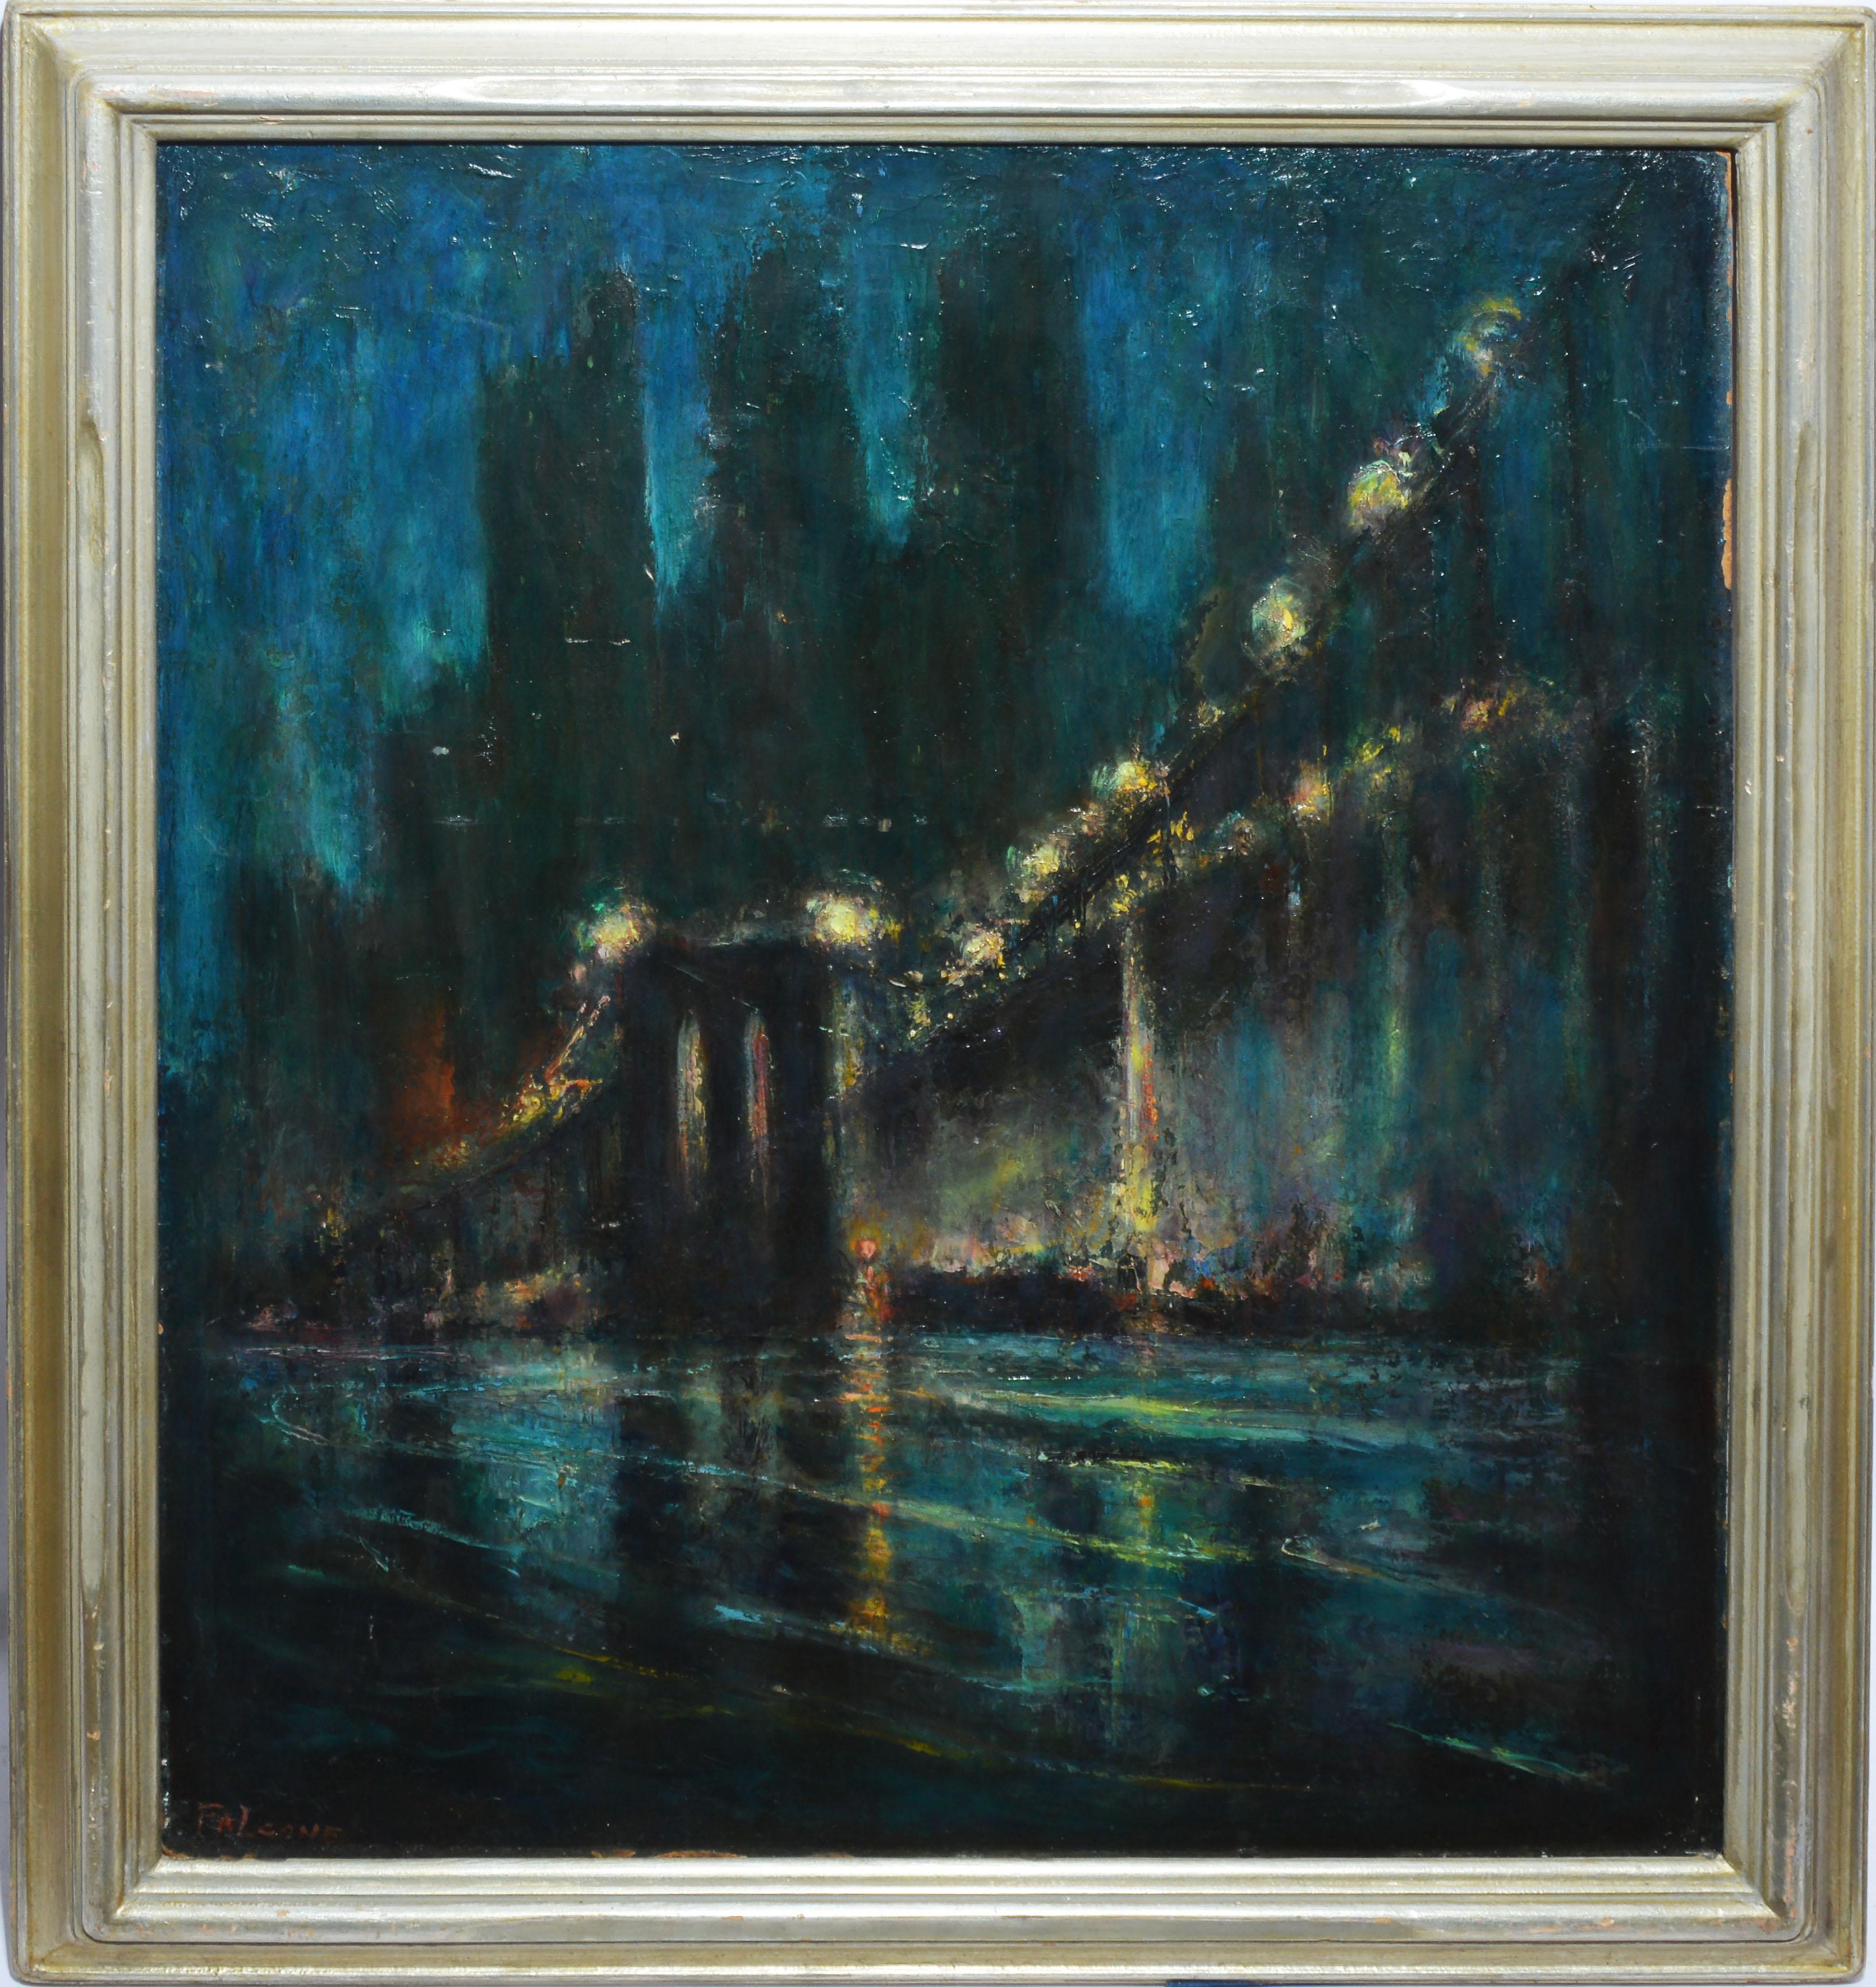 Unknown Abstract Painting - Vintage American Modernist Oil Painting, "Brooklyn Bridge at Night" by Falcone